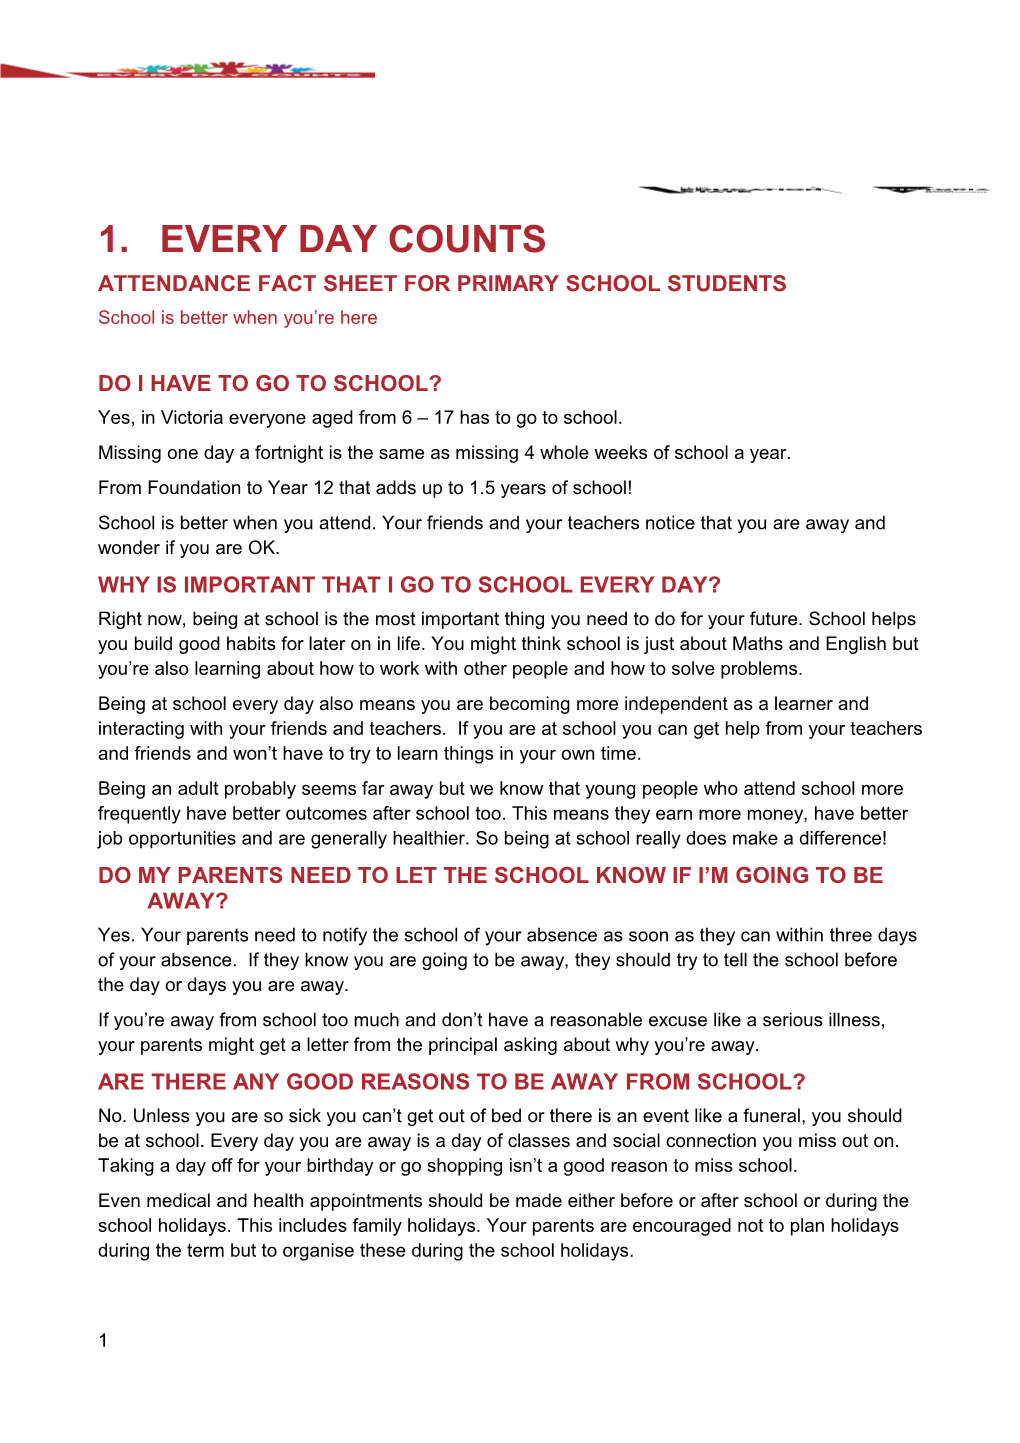 Attendance Fact Sheet for Primary School Students